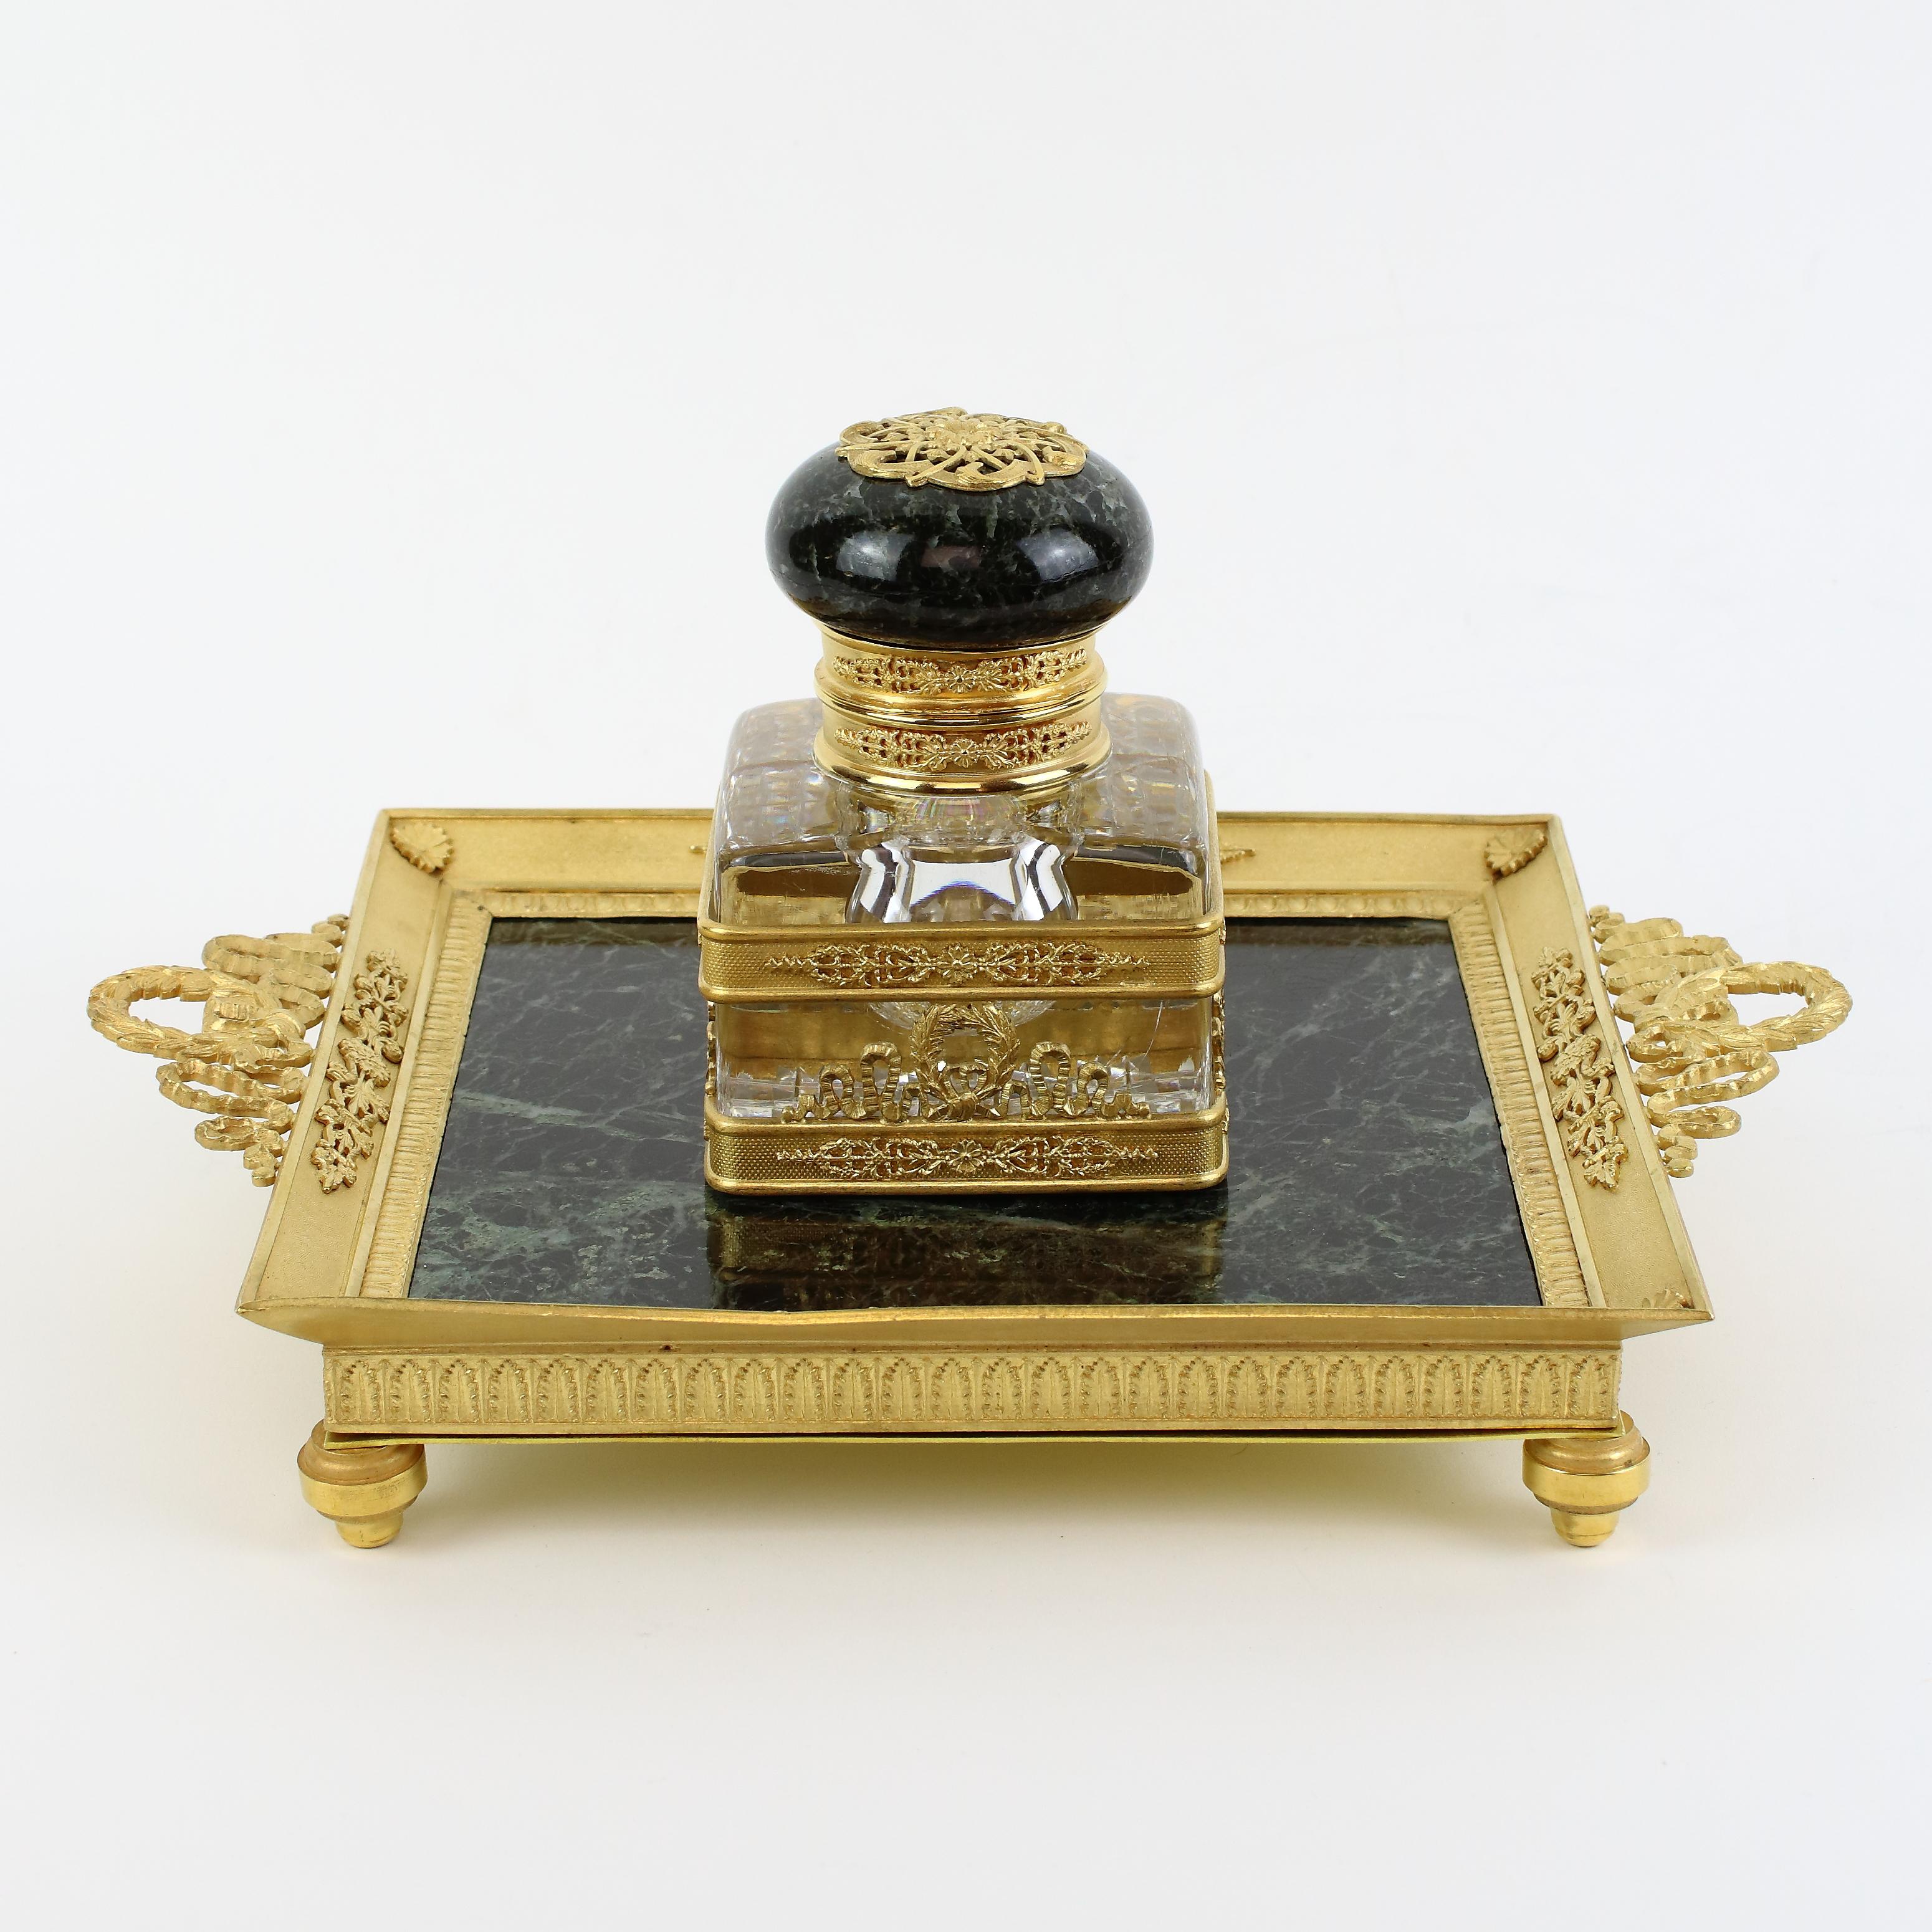 French 19th century Empire gilt bronze crystal marble inkstand attr. Baccarat

Square green marble plate standing on gilt bronze toupie feet with high gilt bronze rim elaborately decorated with neoclassical lanzetto leaf frieze and foliate